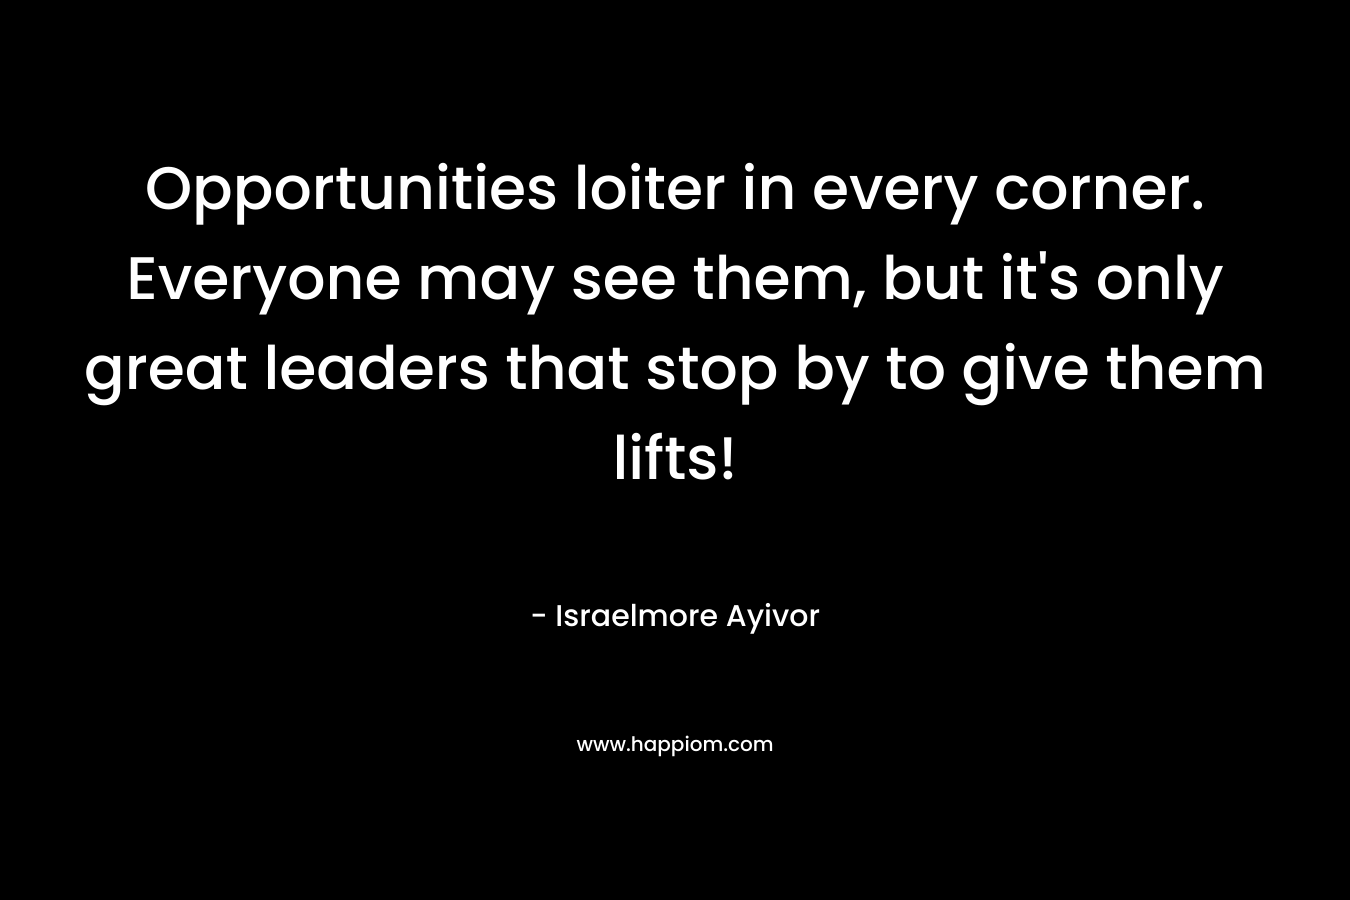 Opportunities loiter in every corner. Everyone may see them, but it's only great leaders that stop by to give them lifts!